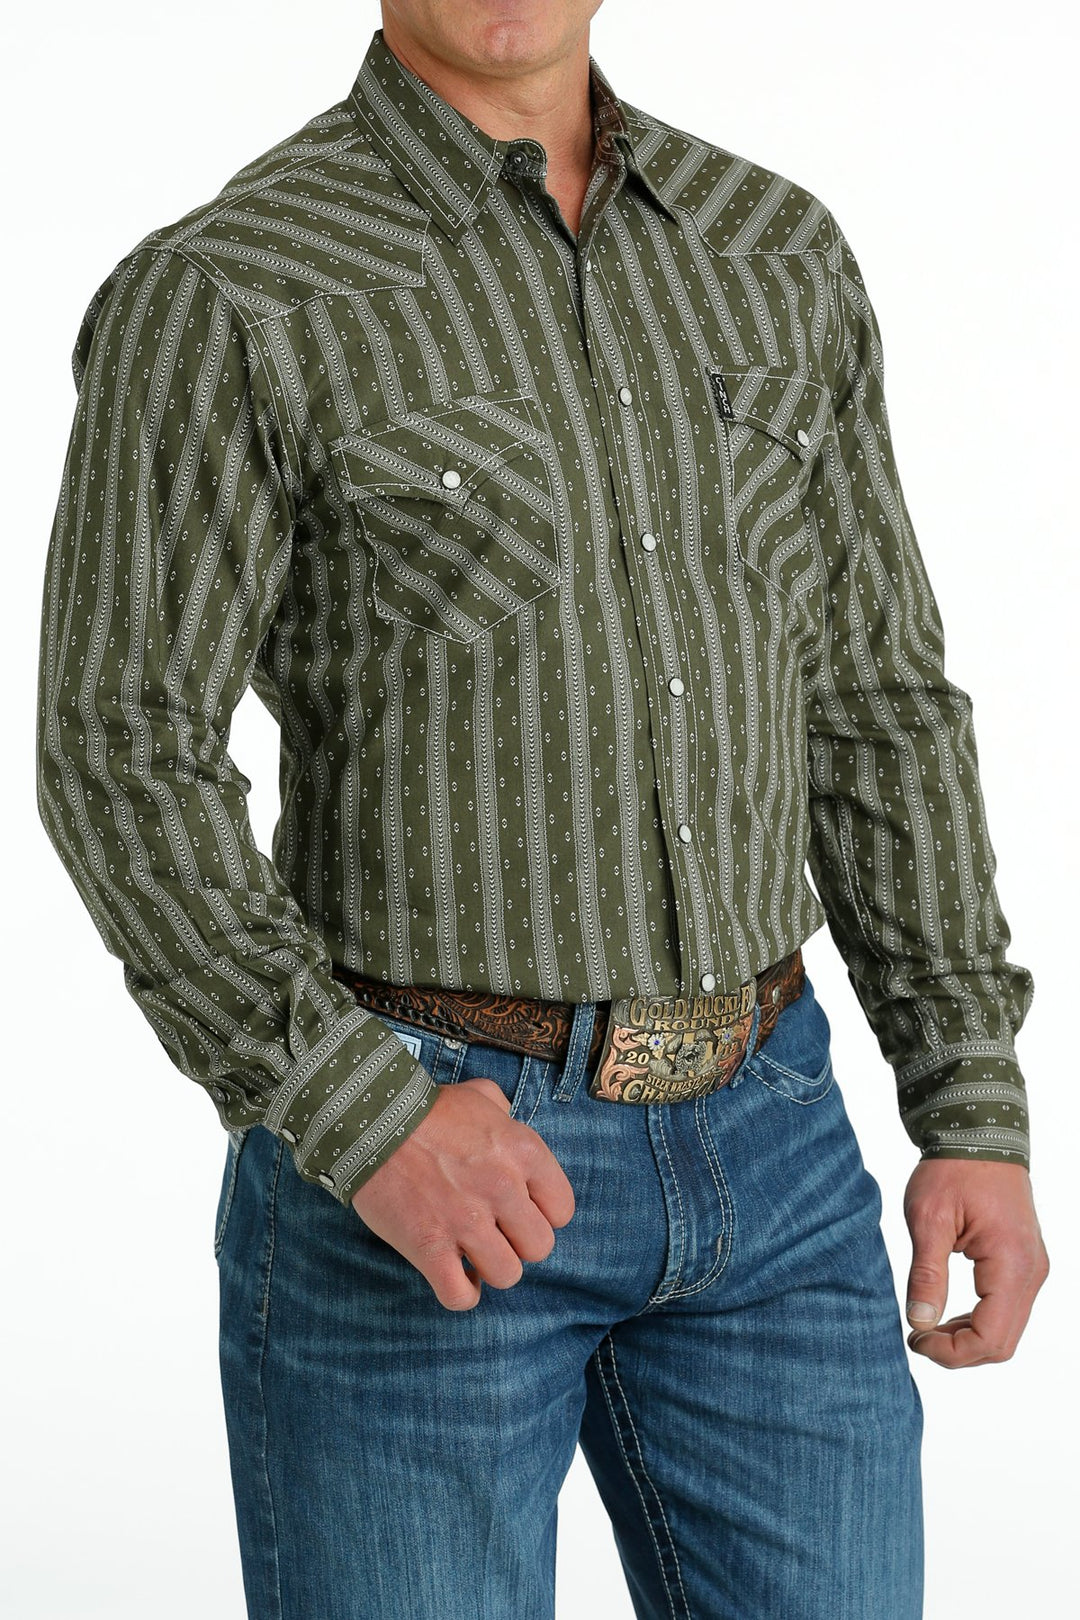 Cinch - Mens Olive Snap Button Arena Shirt